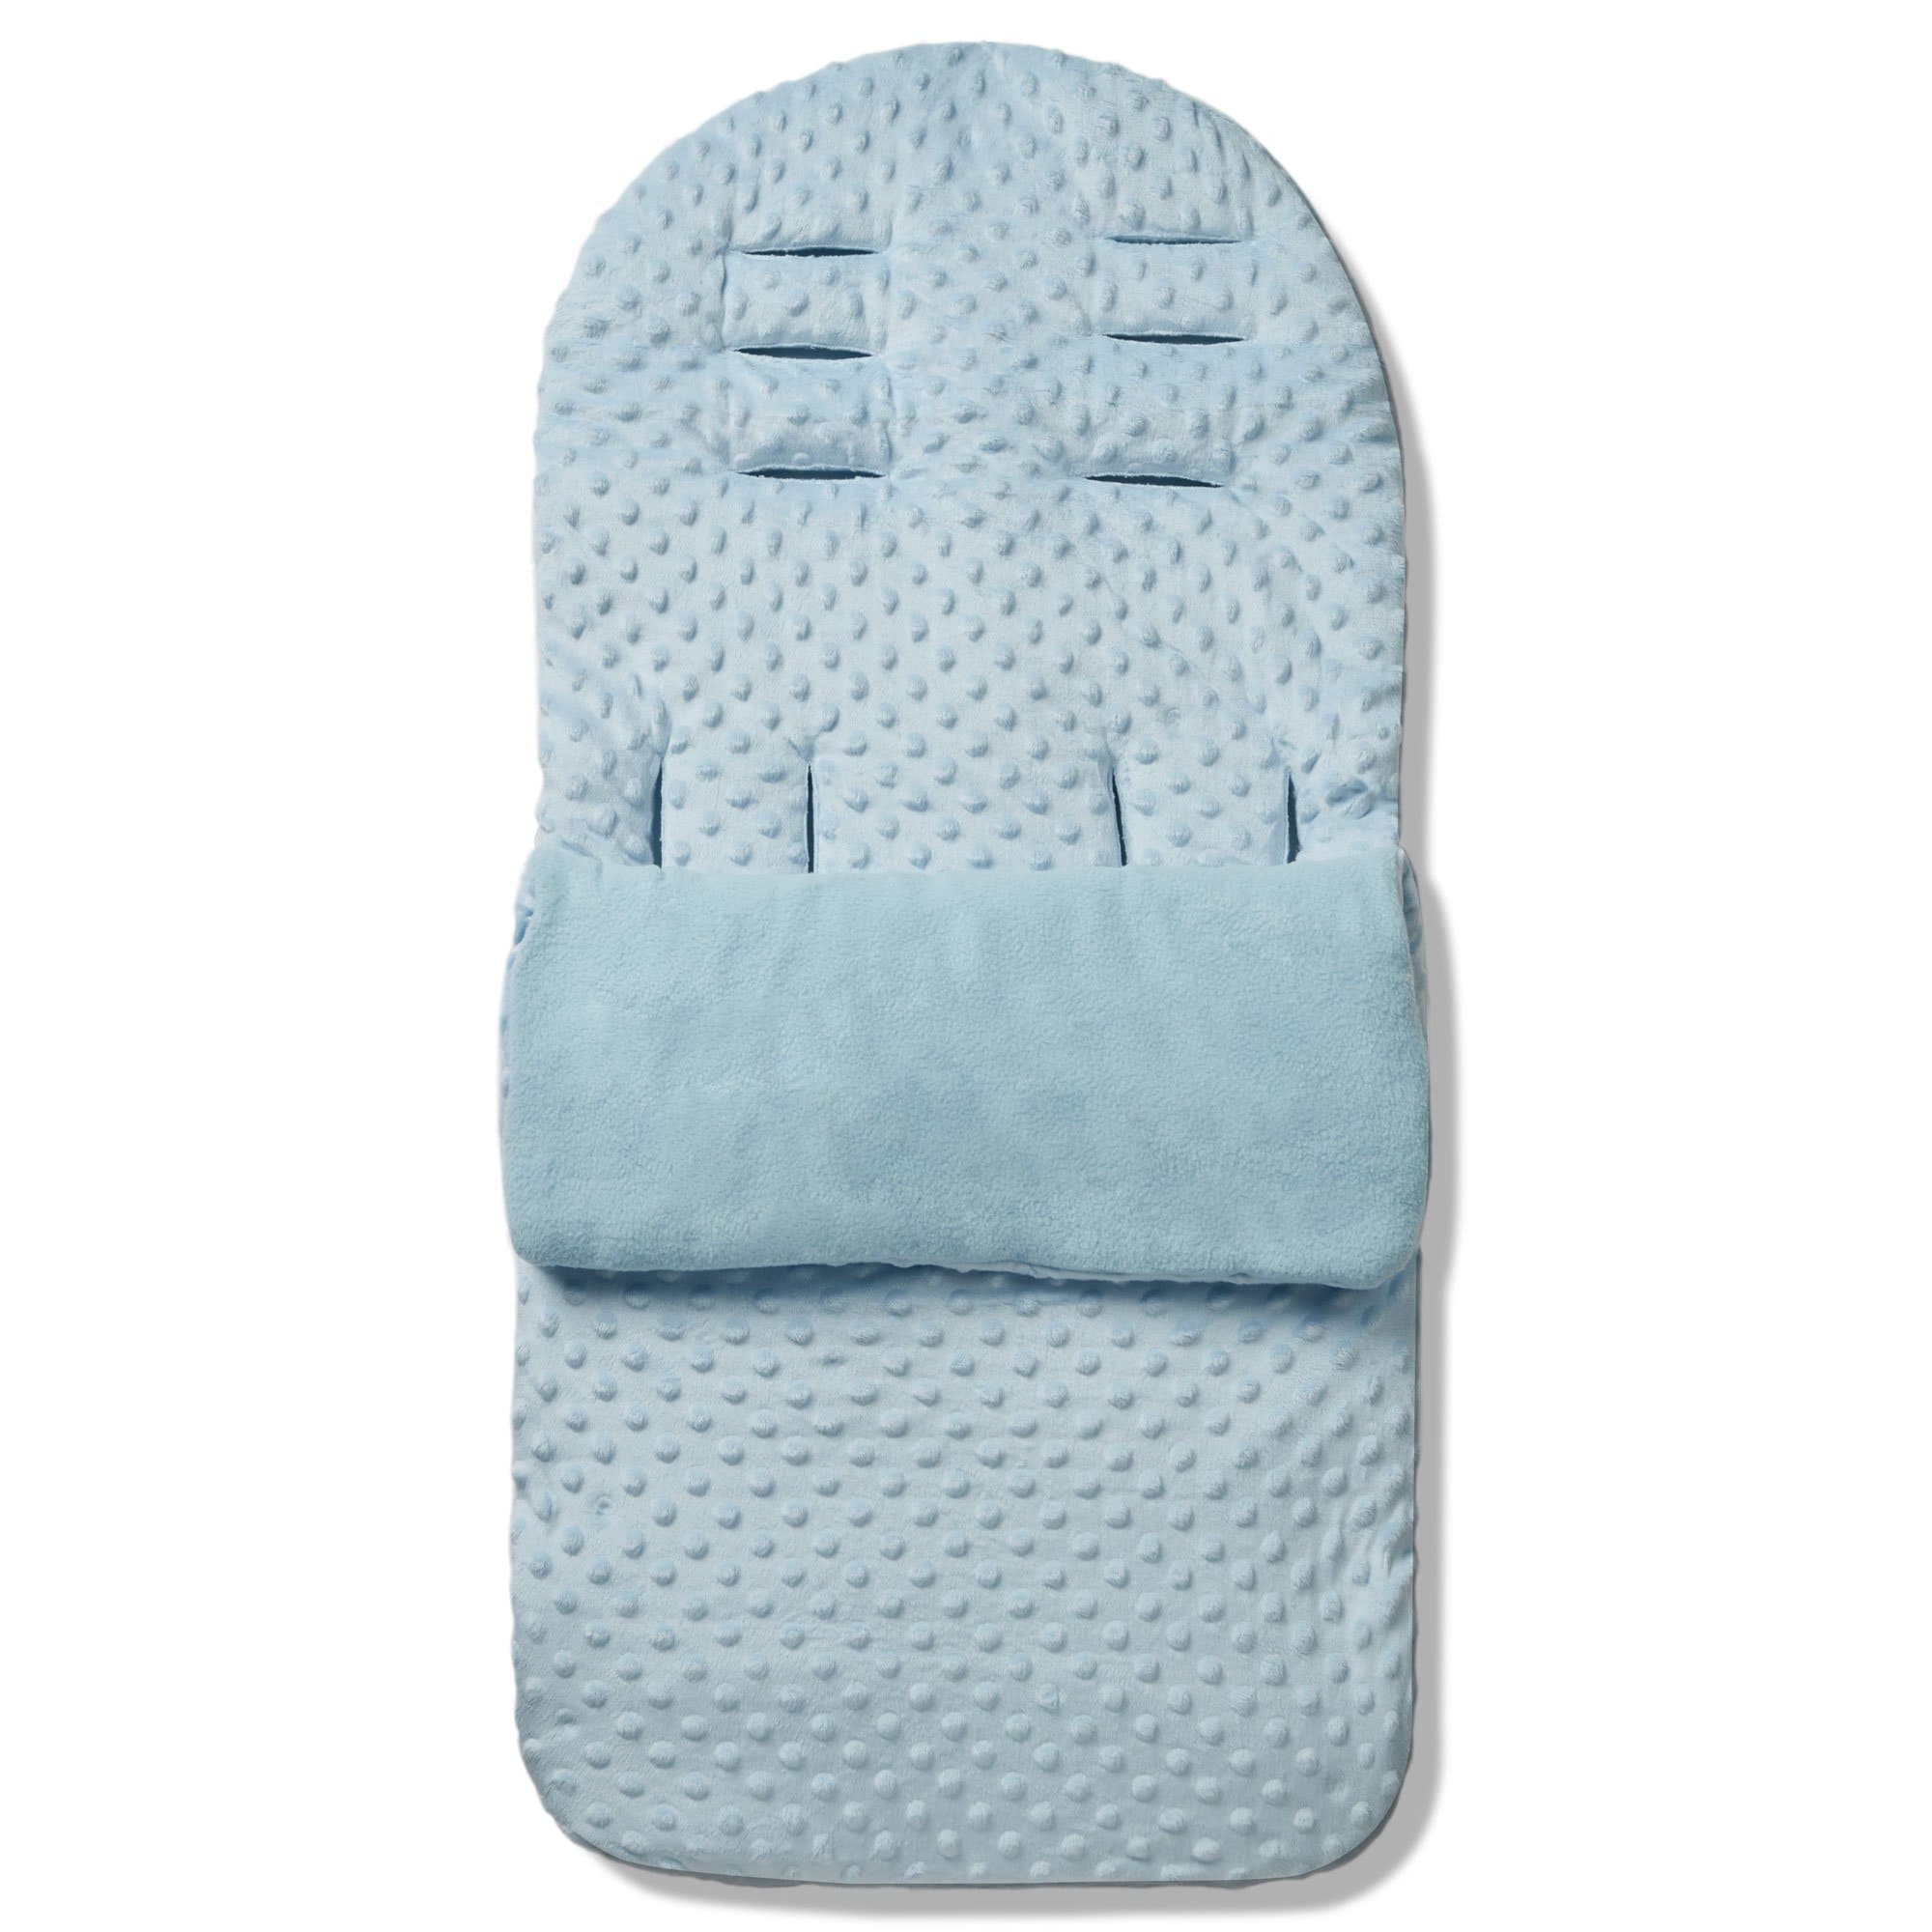 Dimple Footmuff / Cosy Toes Compatible with Zooper - Blue / Fits All Models | For Your Little One